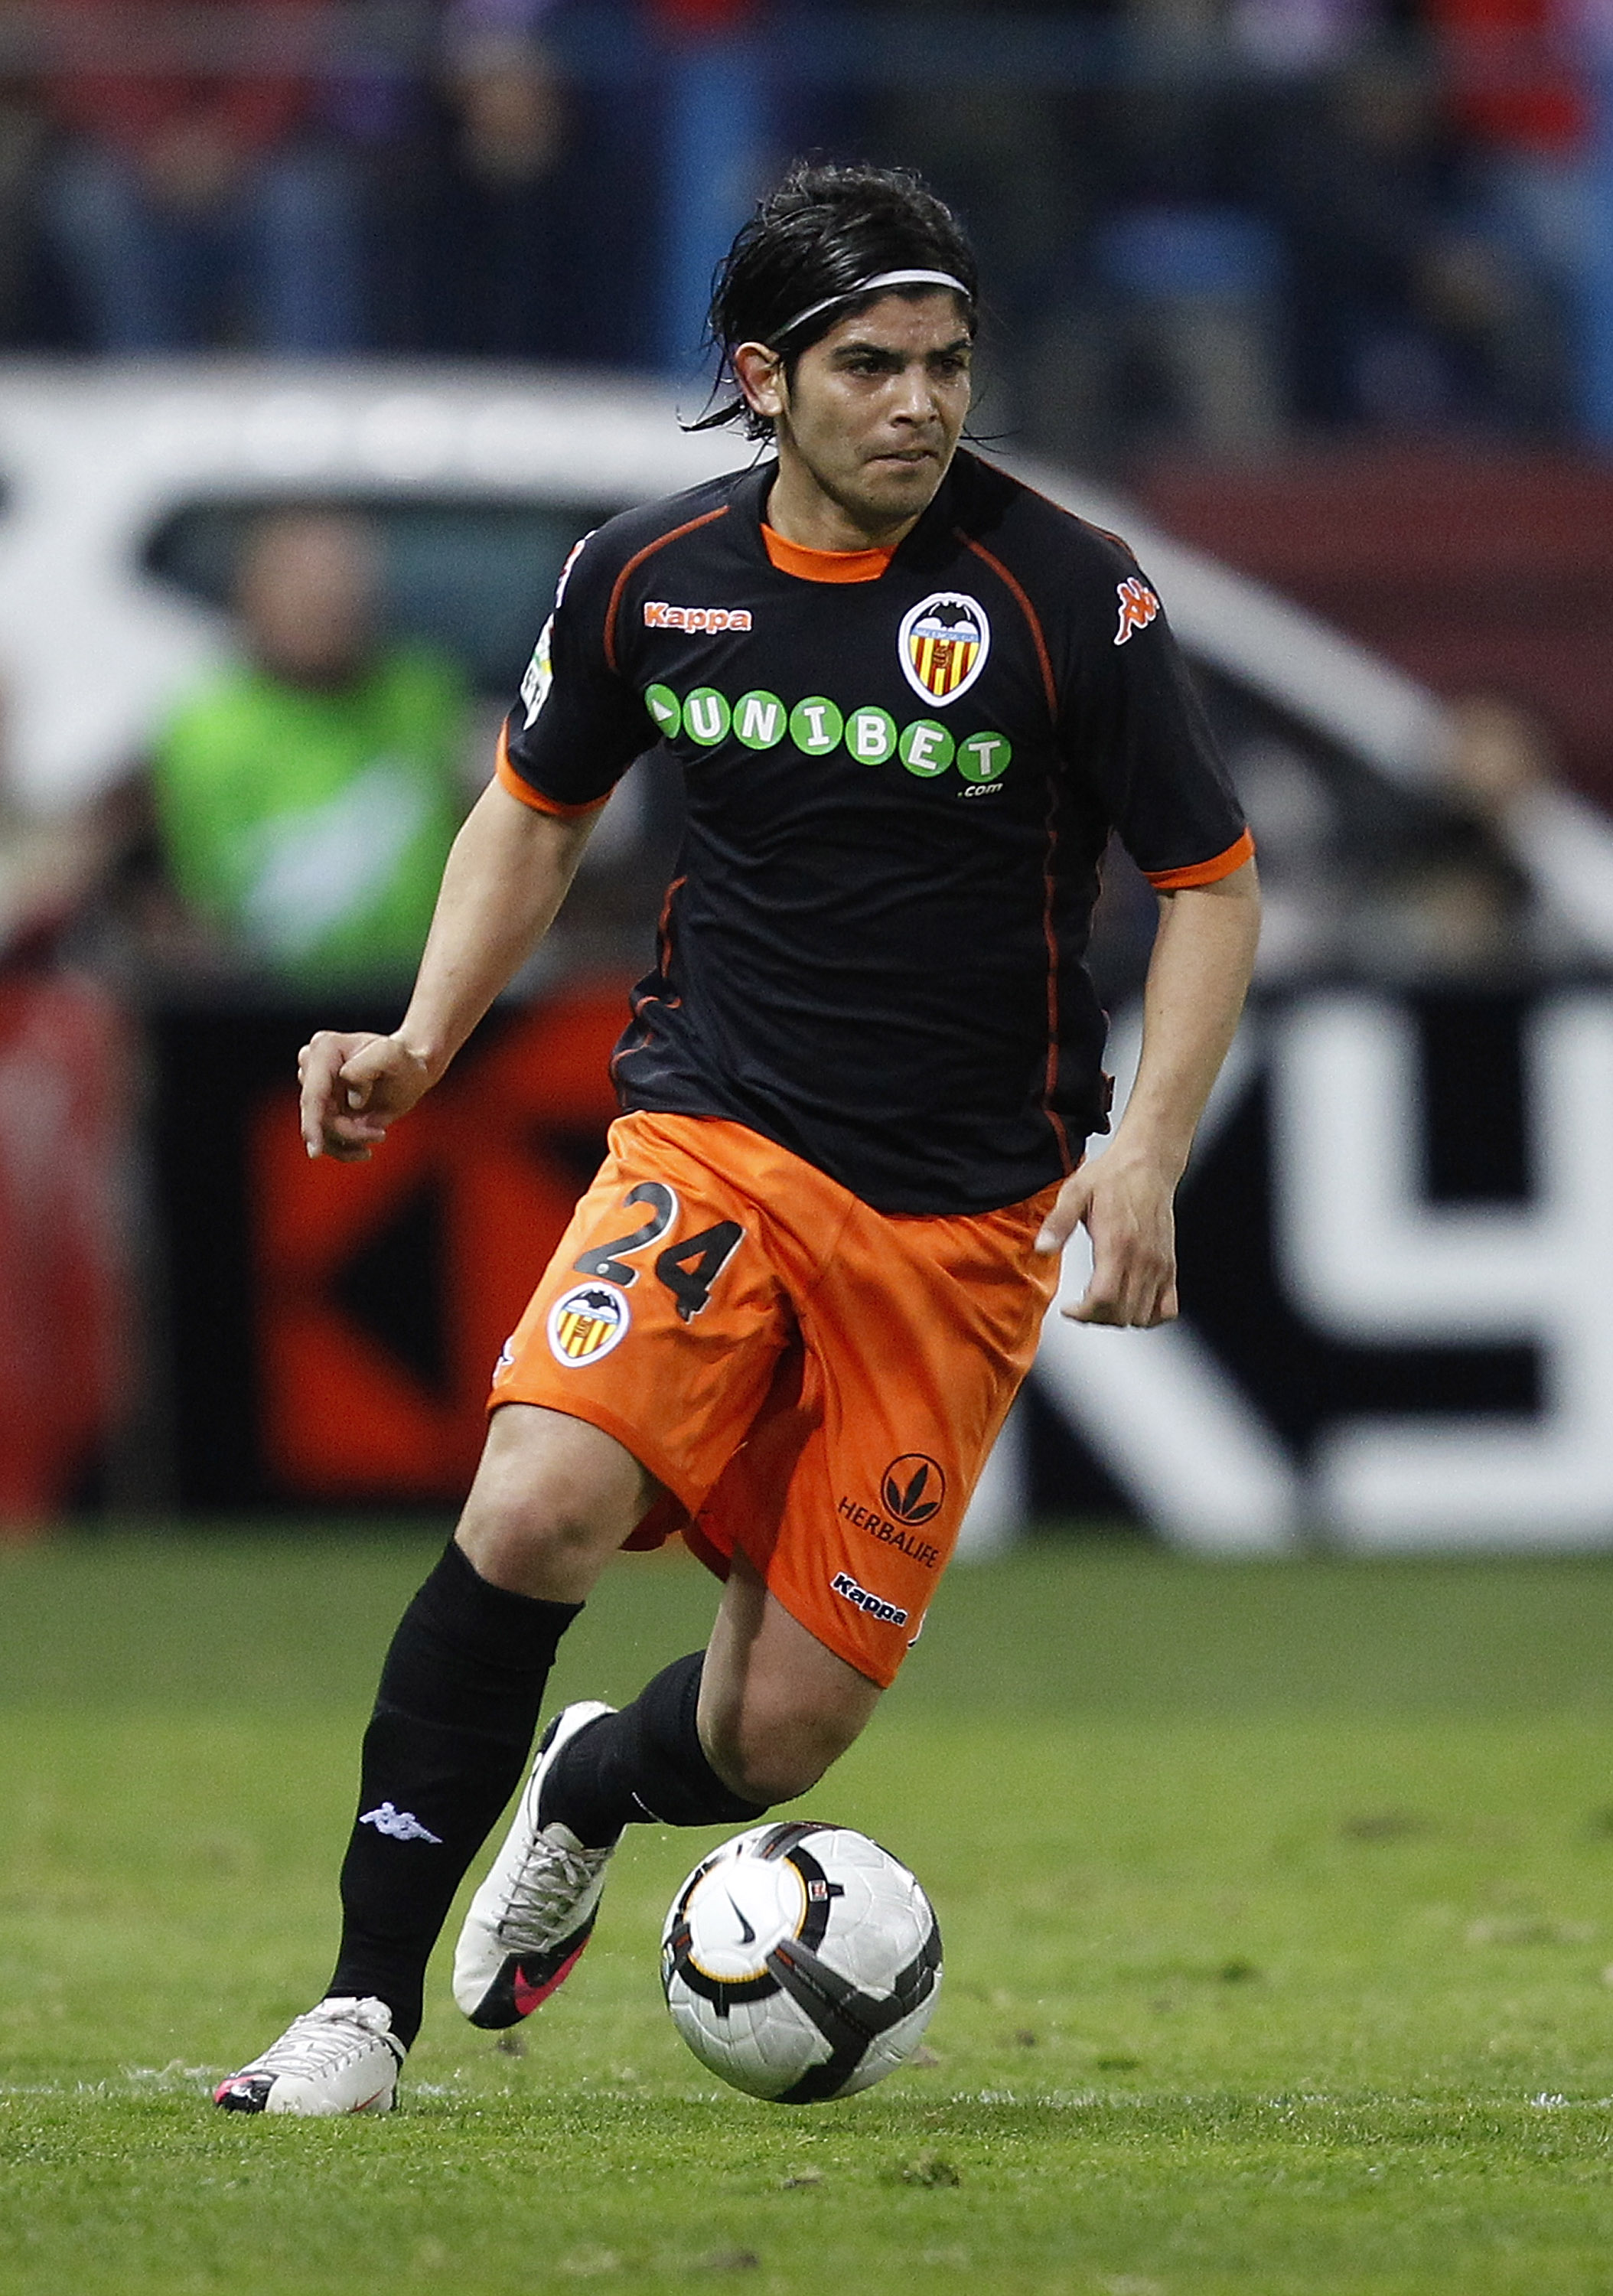 MADRID, SPAIN - FEBRUARY 28:  Ever Banega of Valencia in action during the La Liga match between Atletico Madrid and Valencia at Vicente Calderon Stadium on February 28, 2010 in Madrid, Spain.  (Photo by Angel Martinez/Getty Images)